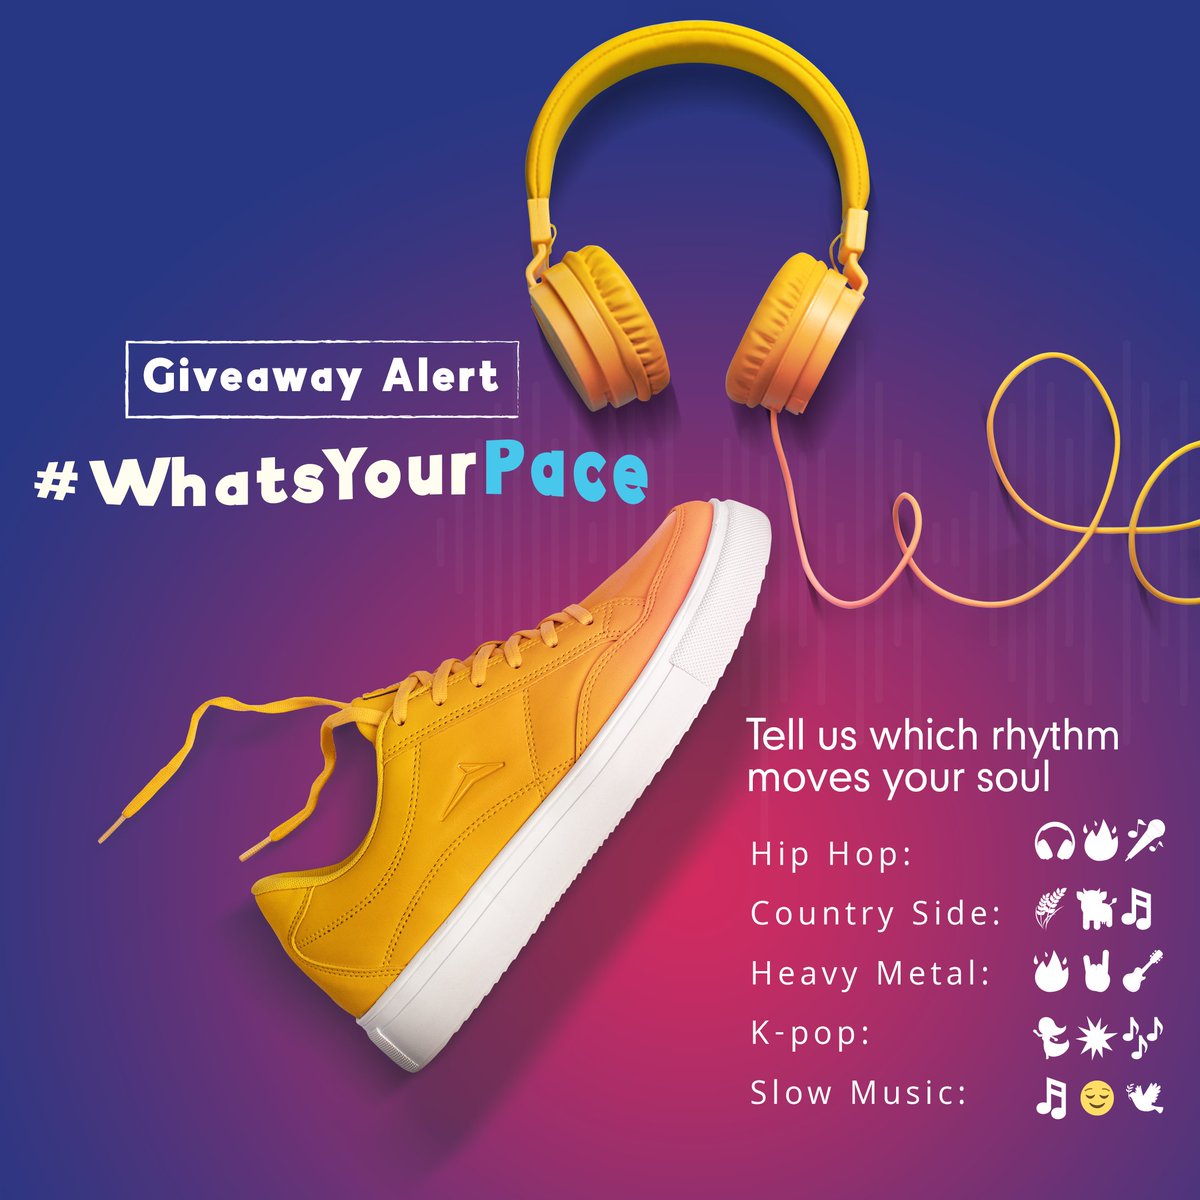 What genre captivates your heart? 

Don’t forget to:
✅Follow and tag @jqrsports
✅Use #WhatsYourPace with your answer 
✅Tag 3 friends you would like to enjoy your favorite rhythm with 

#ContestAlert #contestgiveaway #giveaway #MUSICDAY #contestindia